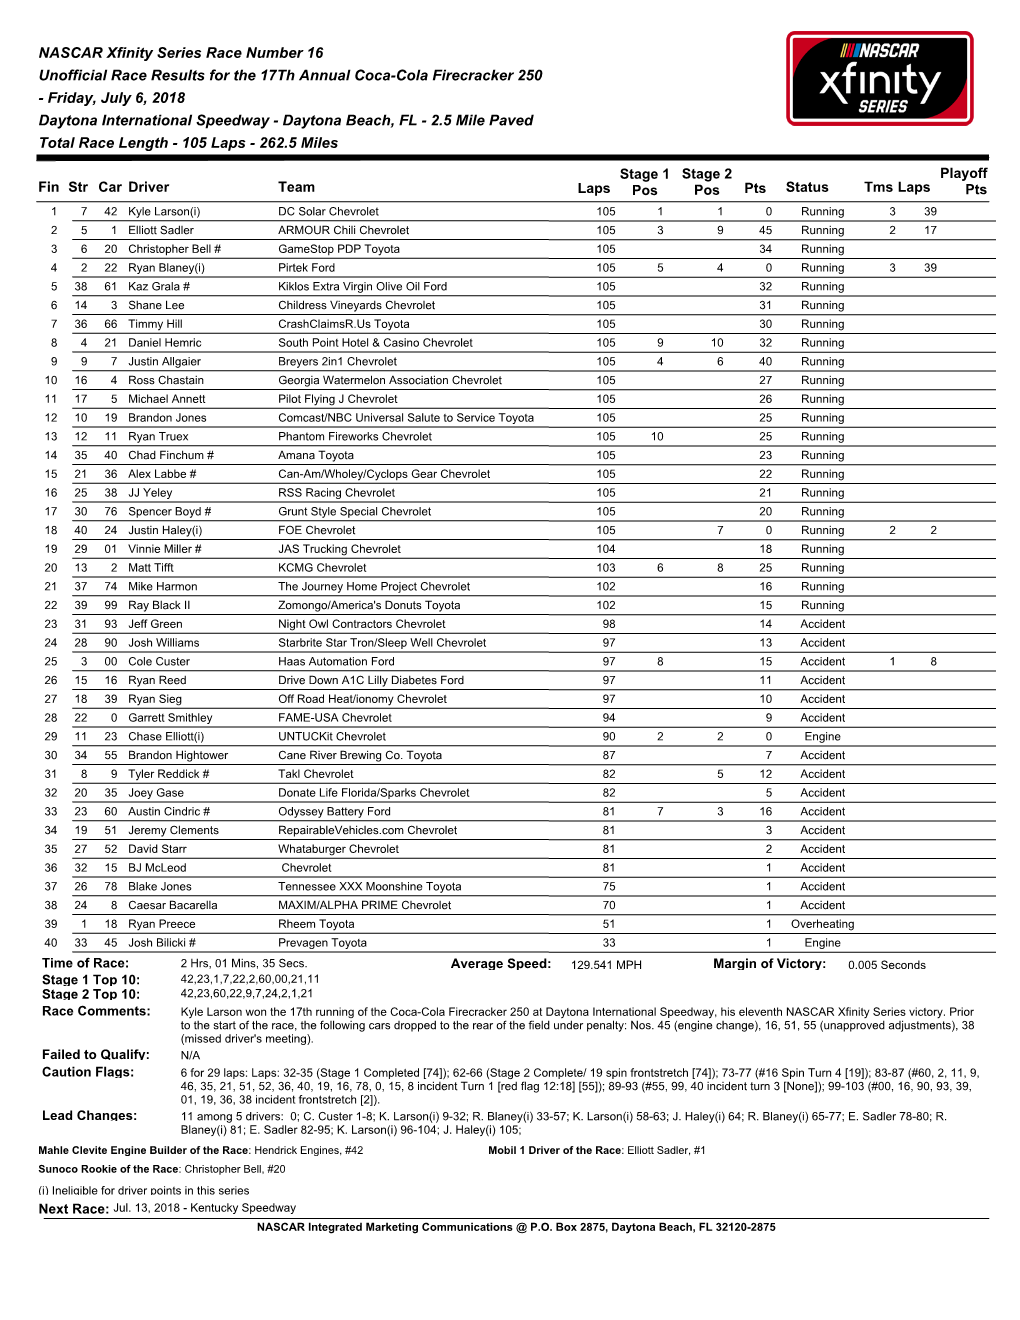 NASCAR Xfinity Series Race Number 16 Unofficial Race Results for The